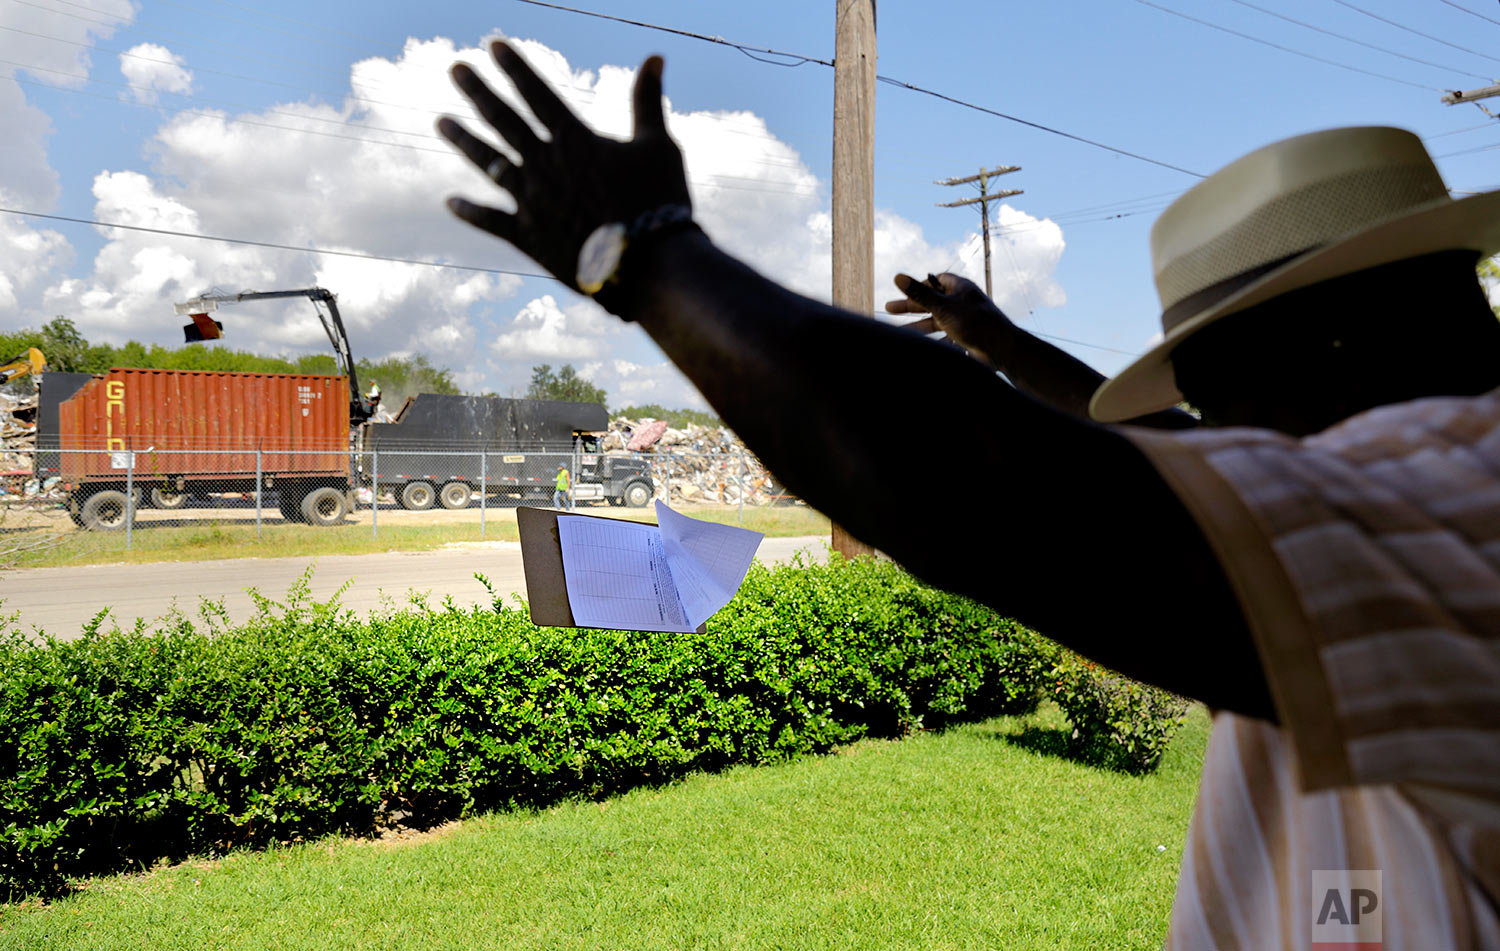  Hilton Kelley tosses his petition clipboard in frustration as he's turned away from a renter who was told by her landlord not to get involved in Kelley's attempt to shutdown the dump across the street piled with flood damaged debris in Port Arthur, 